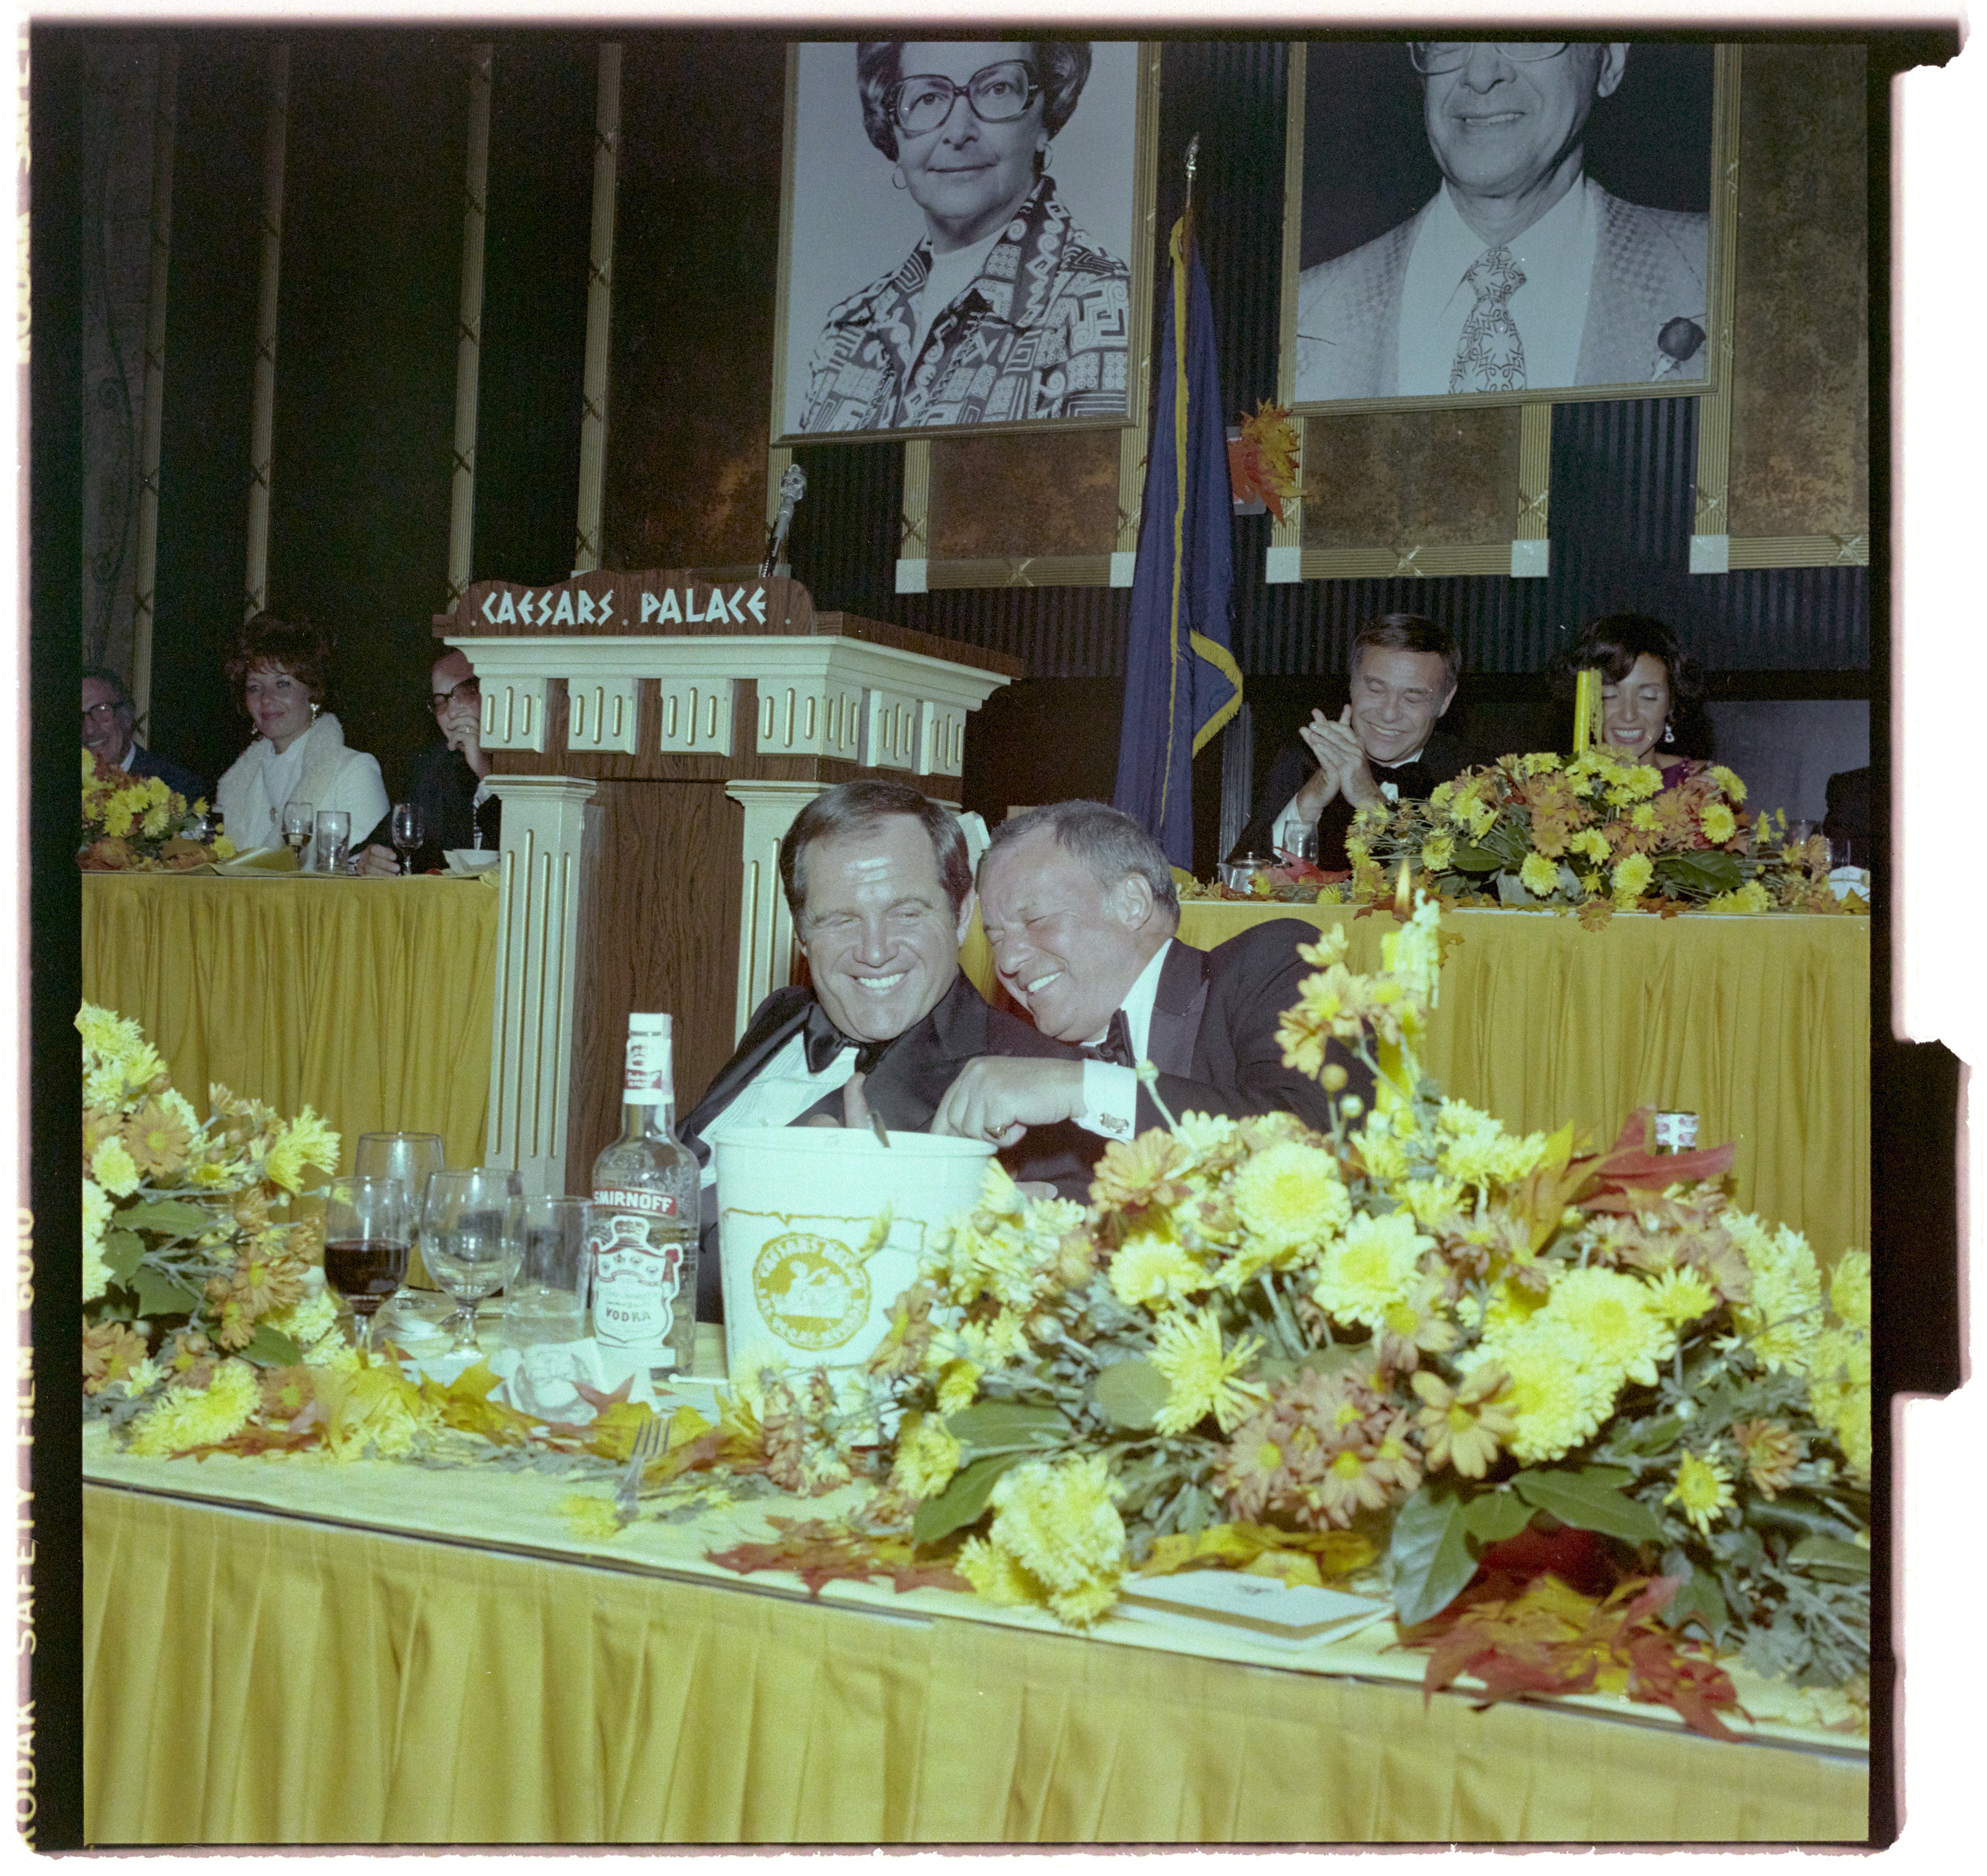 Photographs of Combined Jewish Appeal (Israel Bonds Dinner), image 13